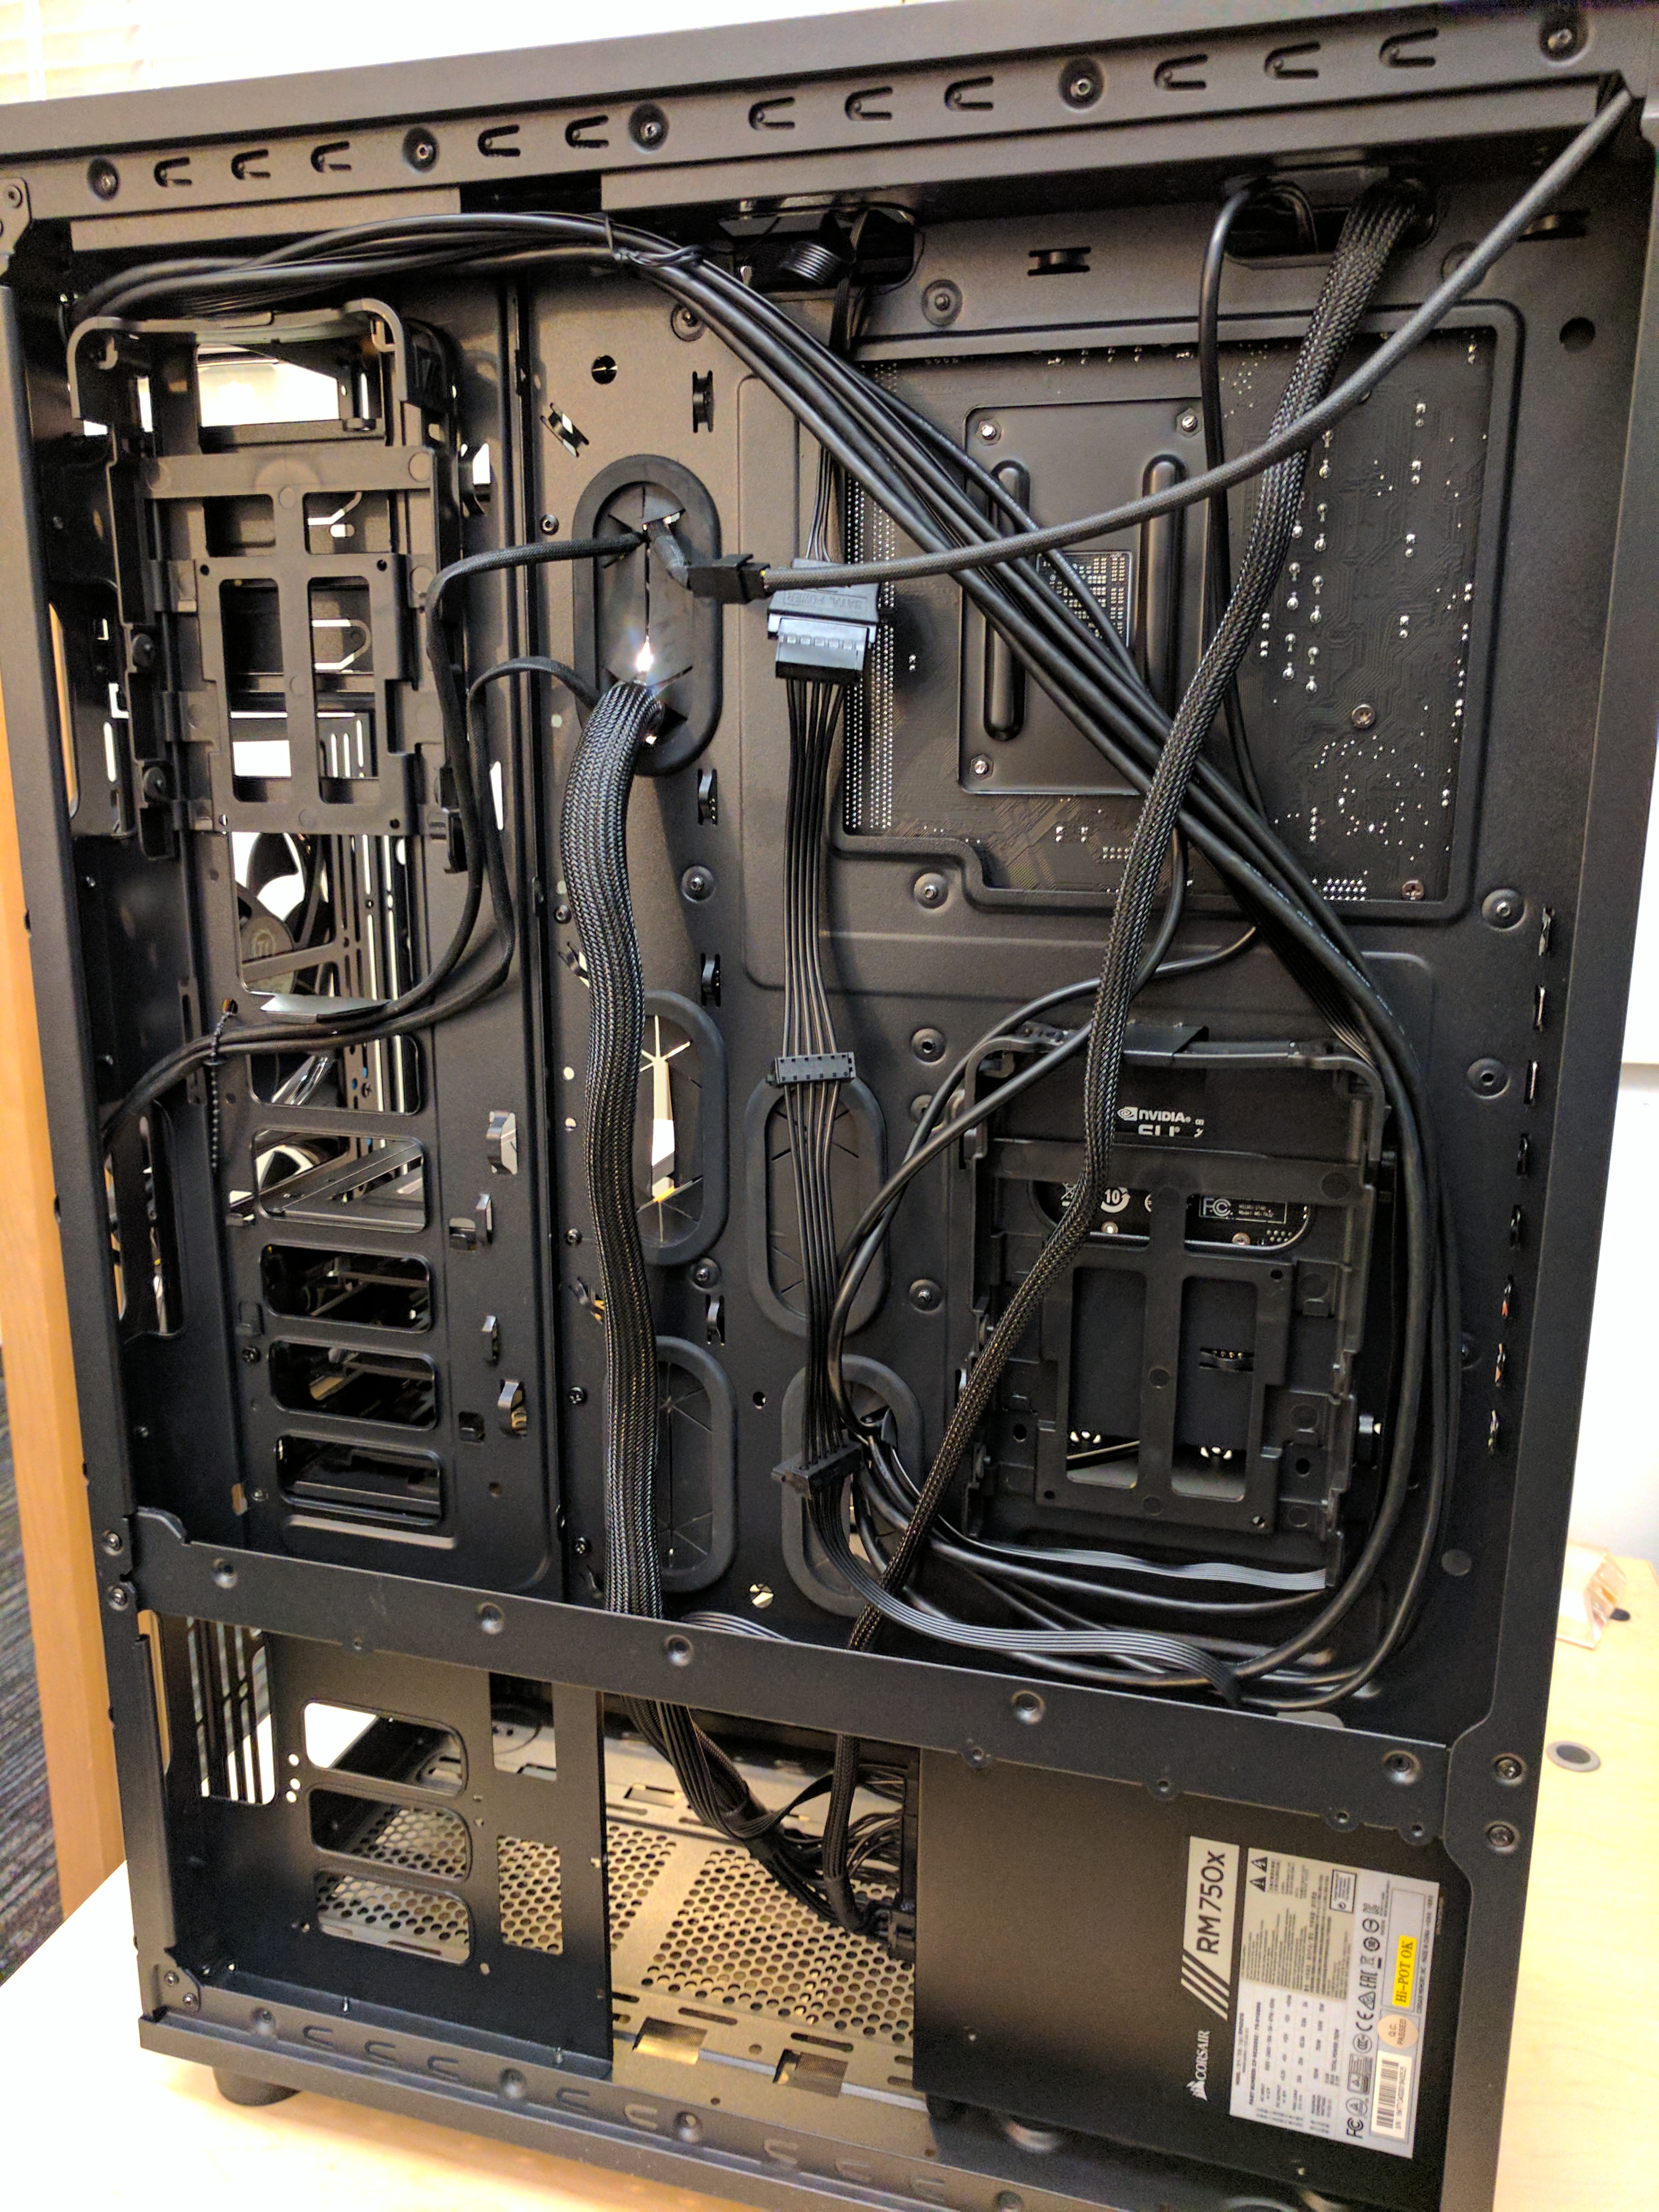 A view from “the dark side”. Cable management is important!